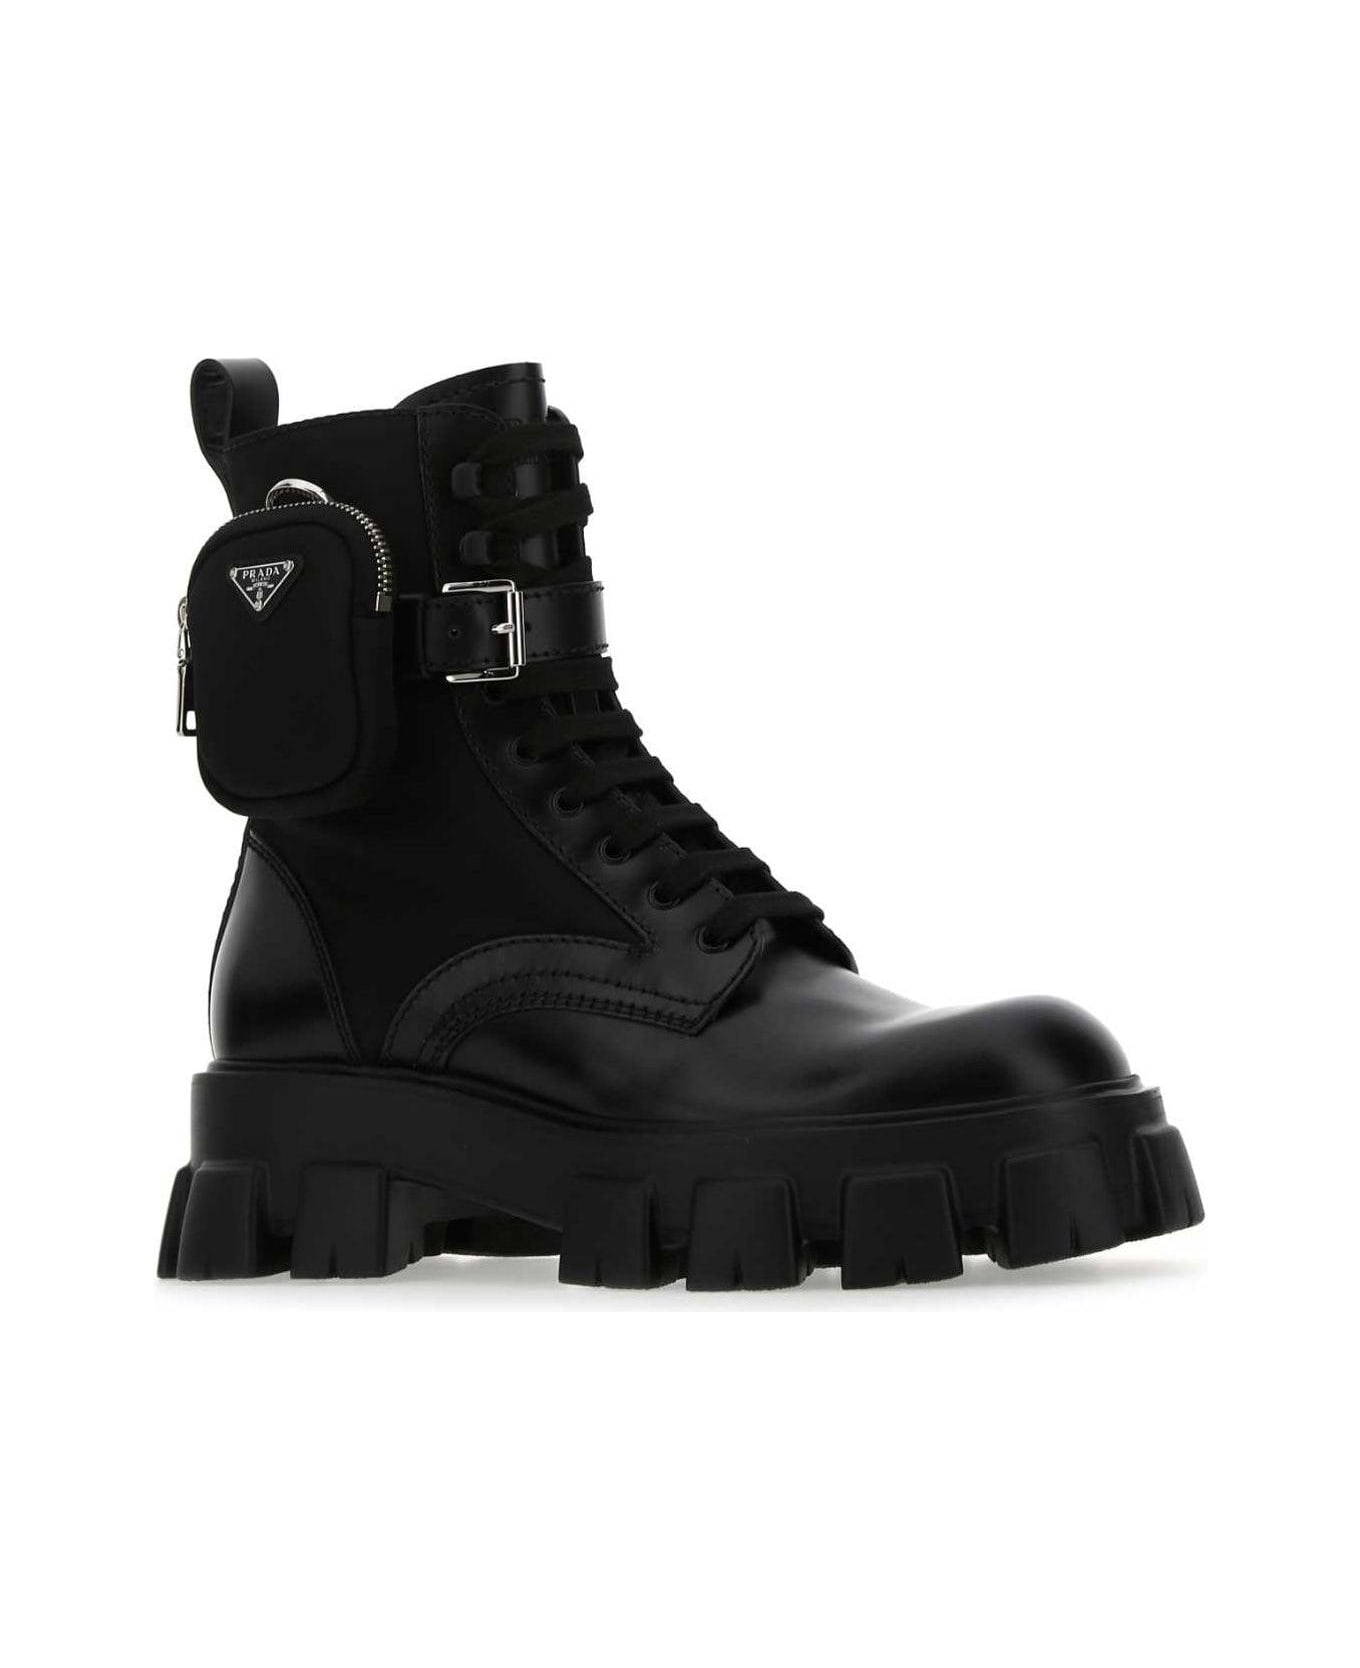 Prada Strapped Pouch Combat Boots | italist